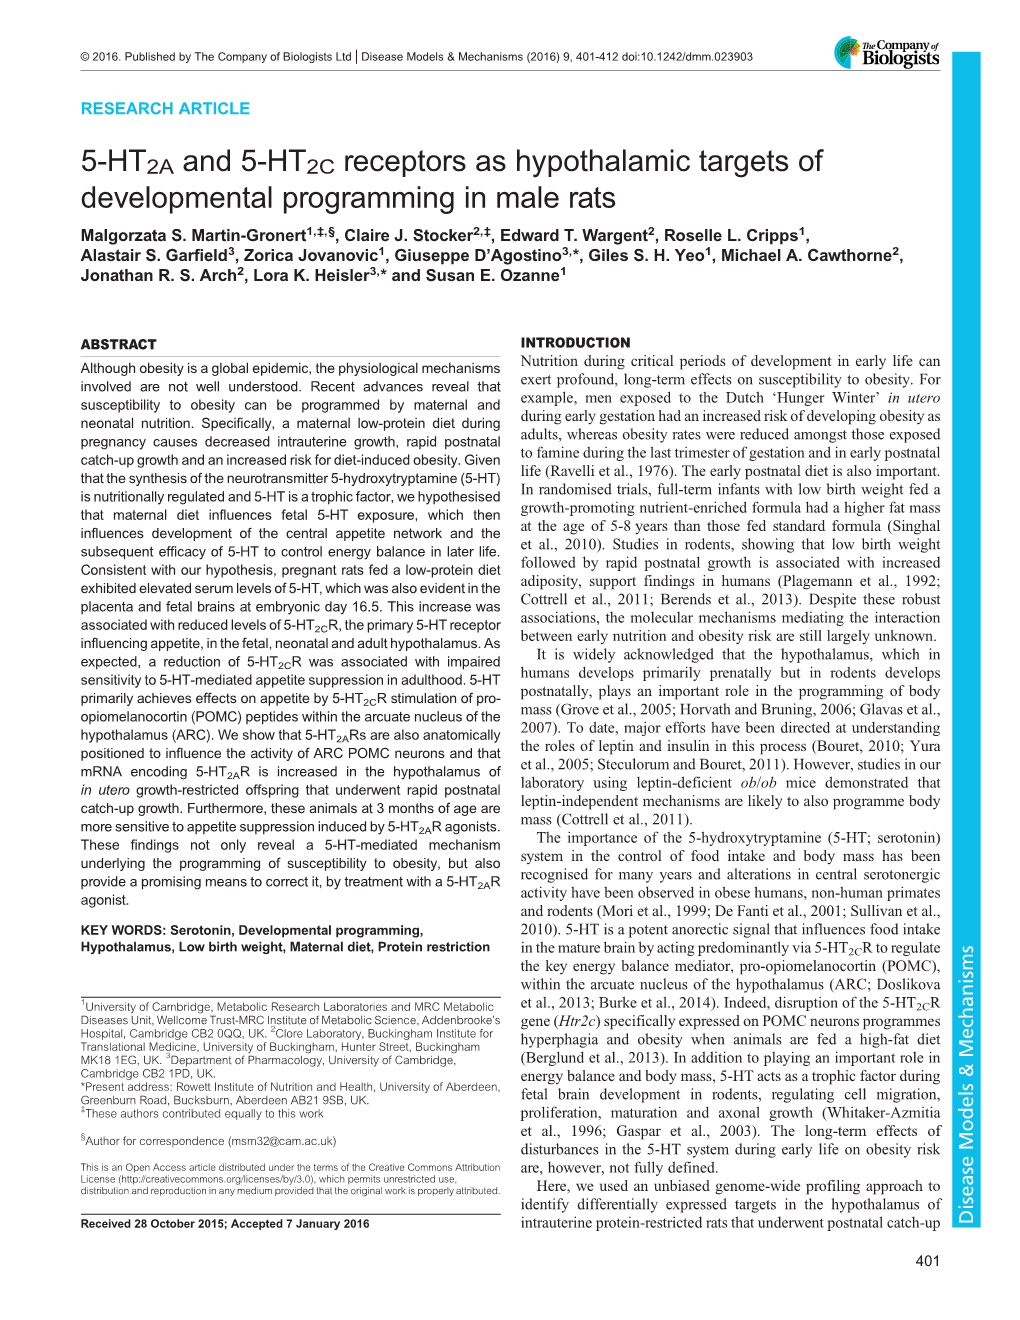 5-HT2A and 5-HT2C Receptors As Hypothalamic Targets of Developmental Programming in Male Rats Malgorzata S